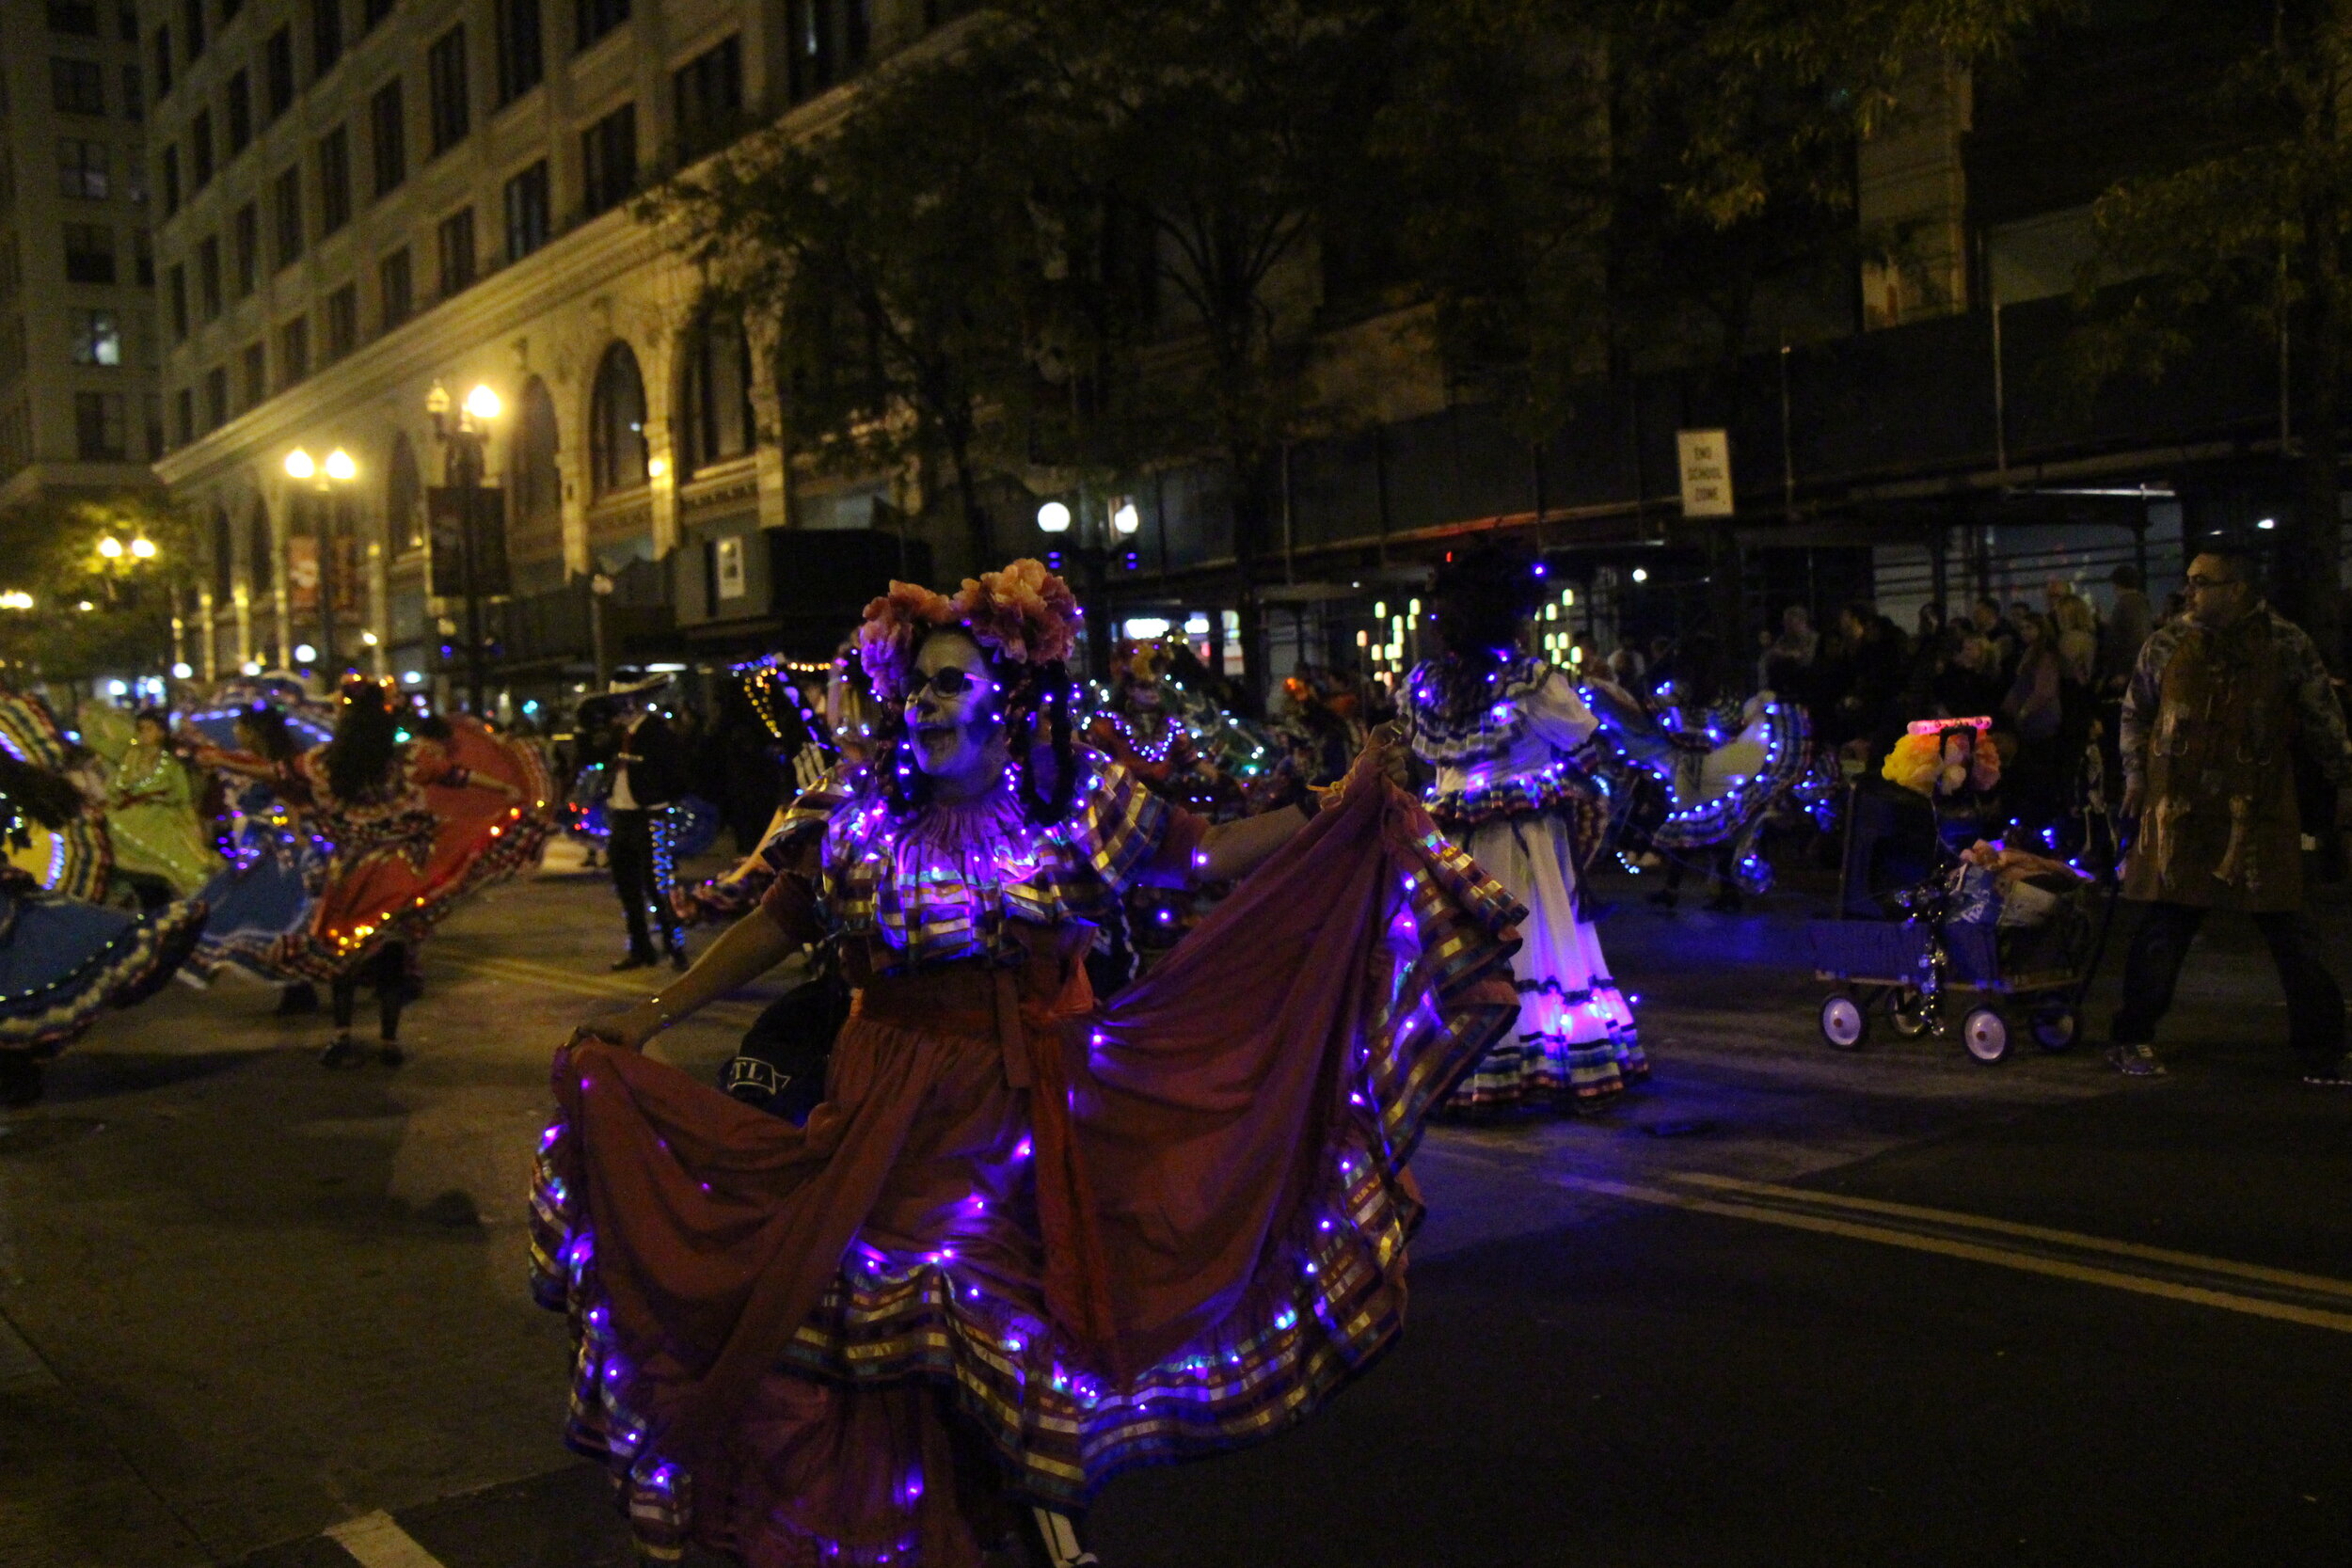 Performers twirling their way across the Art in the Dark parade